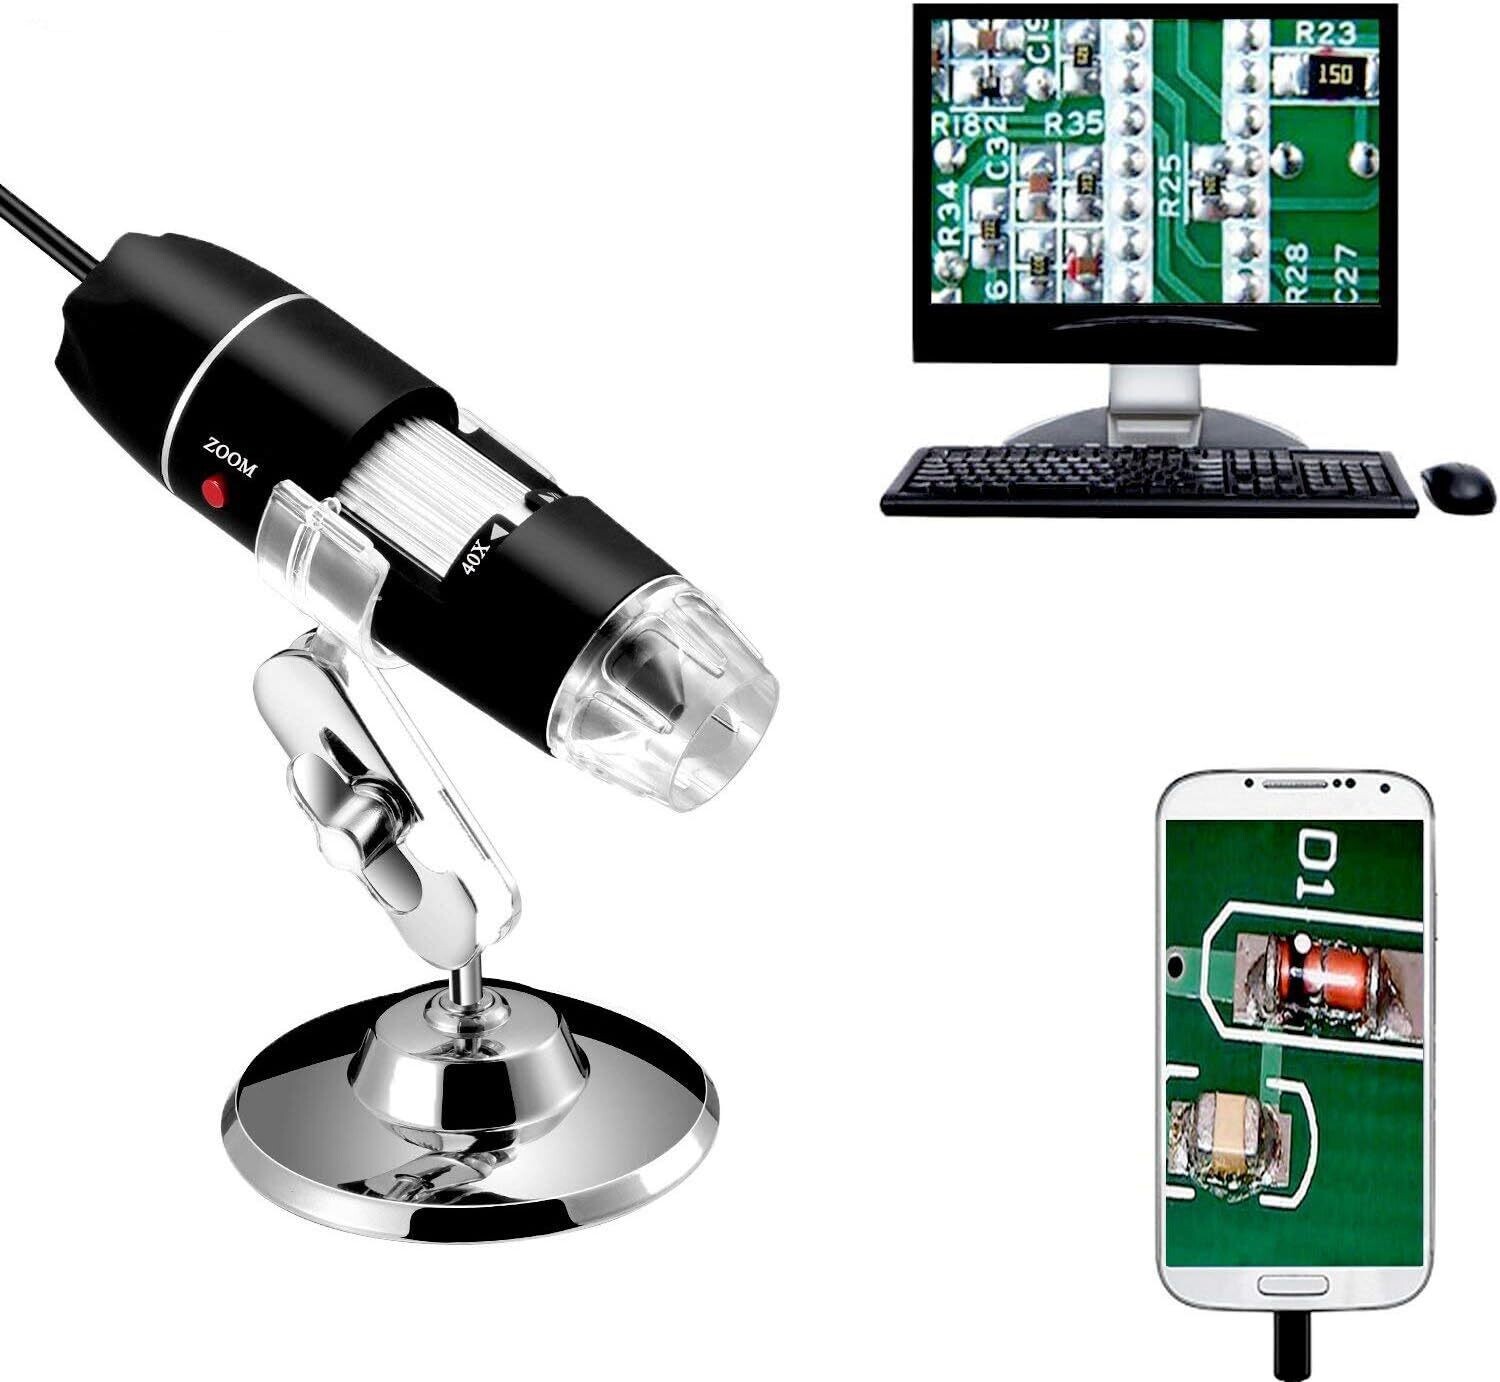 Magnification Endoscope, 8 LED USB 2.0 Digital Microscope, Mini Camera with OTG Adapter and Metal Stand, Compatible with Mac Window 7 8 10 11 Android Linux